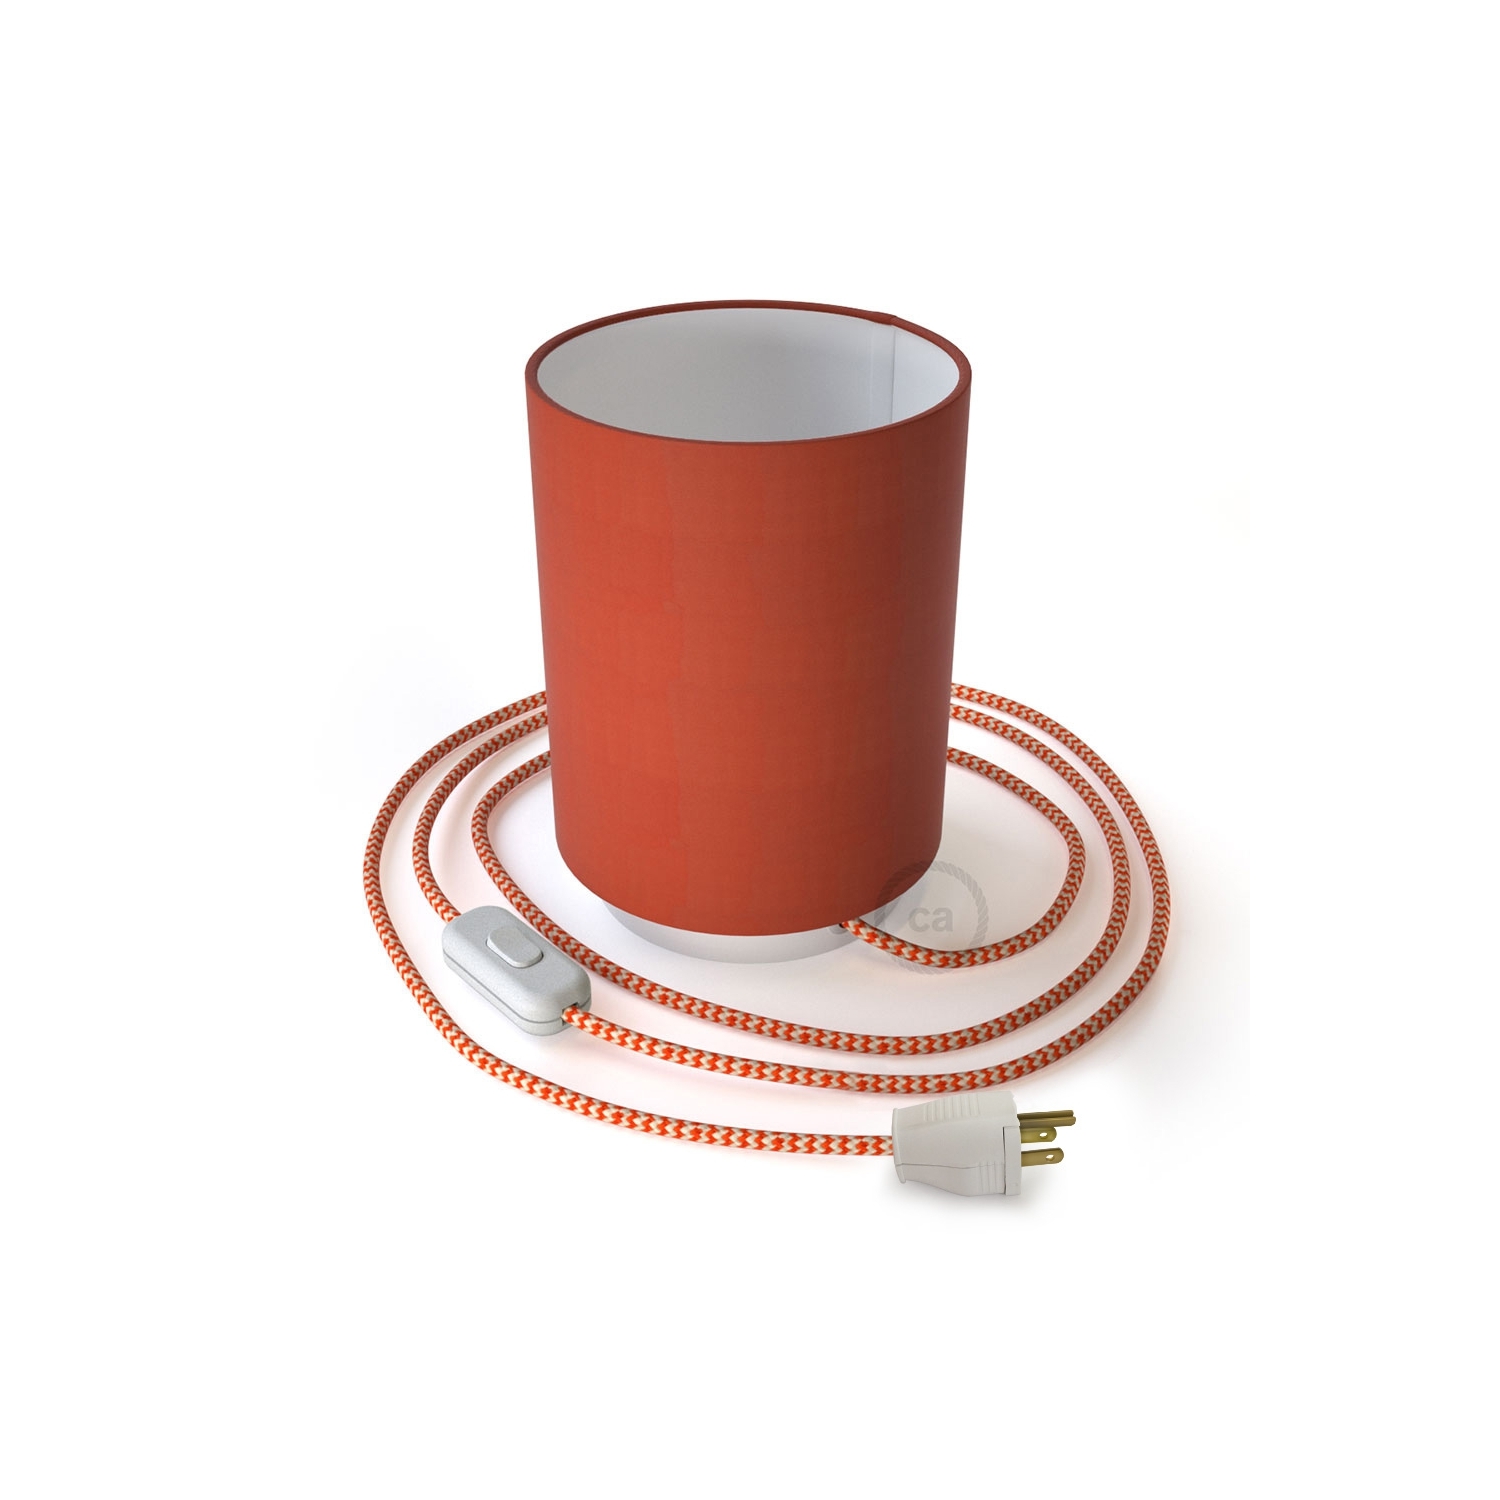 Posaluce with Lobster Cinette Cylinder lampshade, white metal, with textile cable, switch and plug